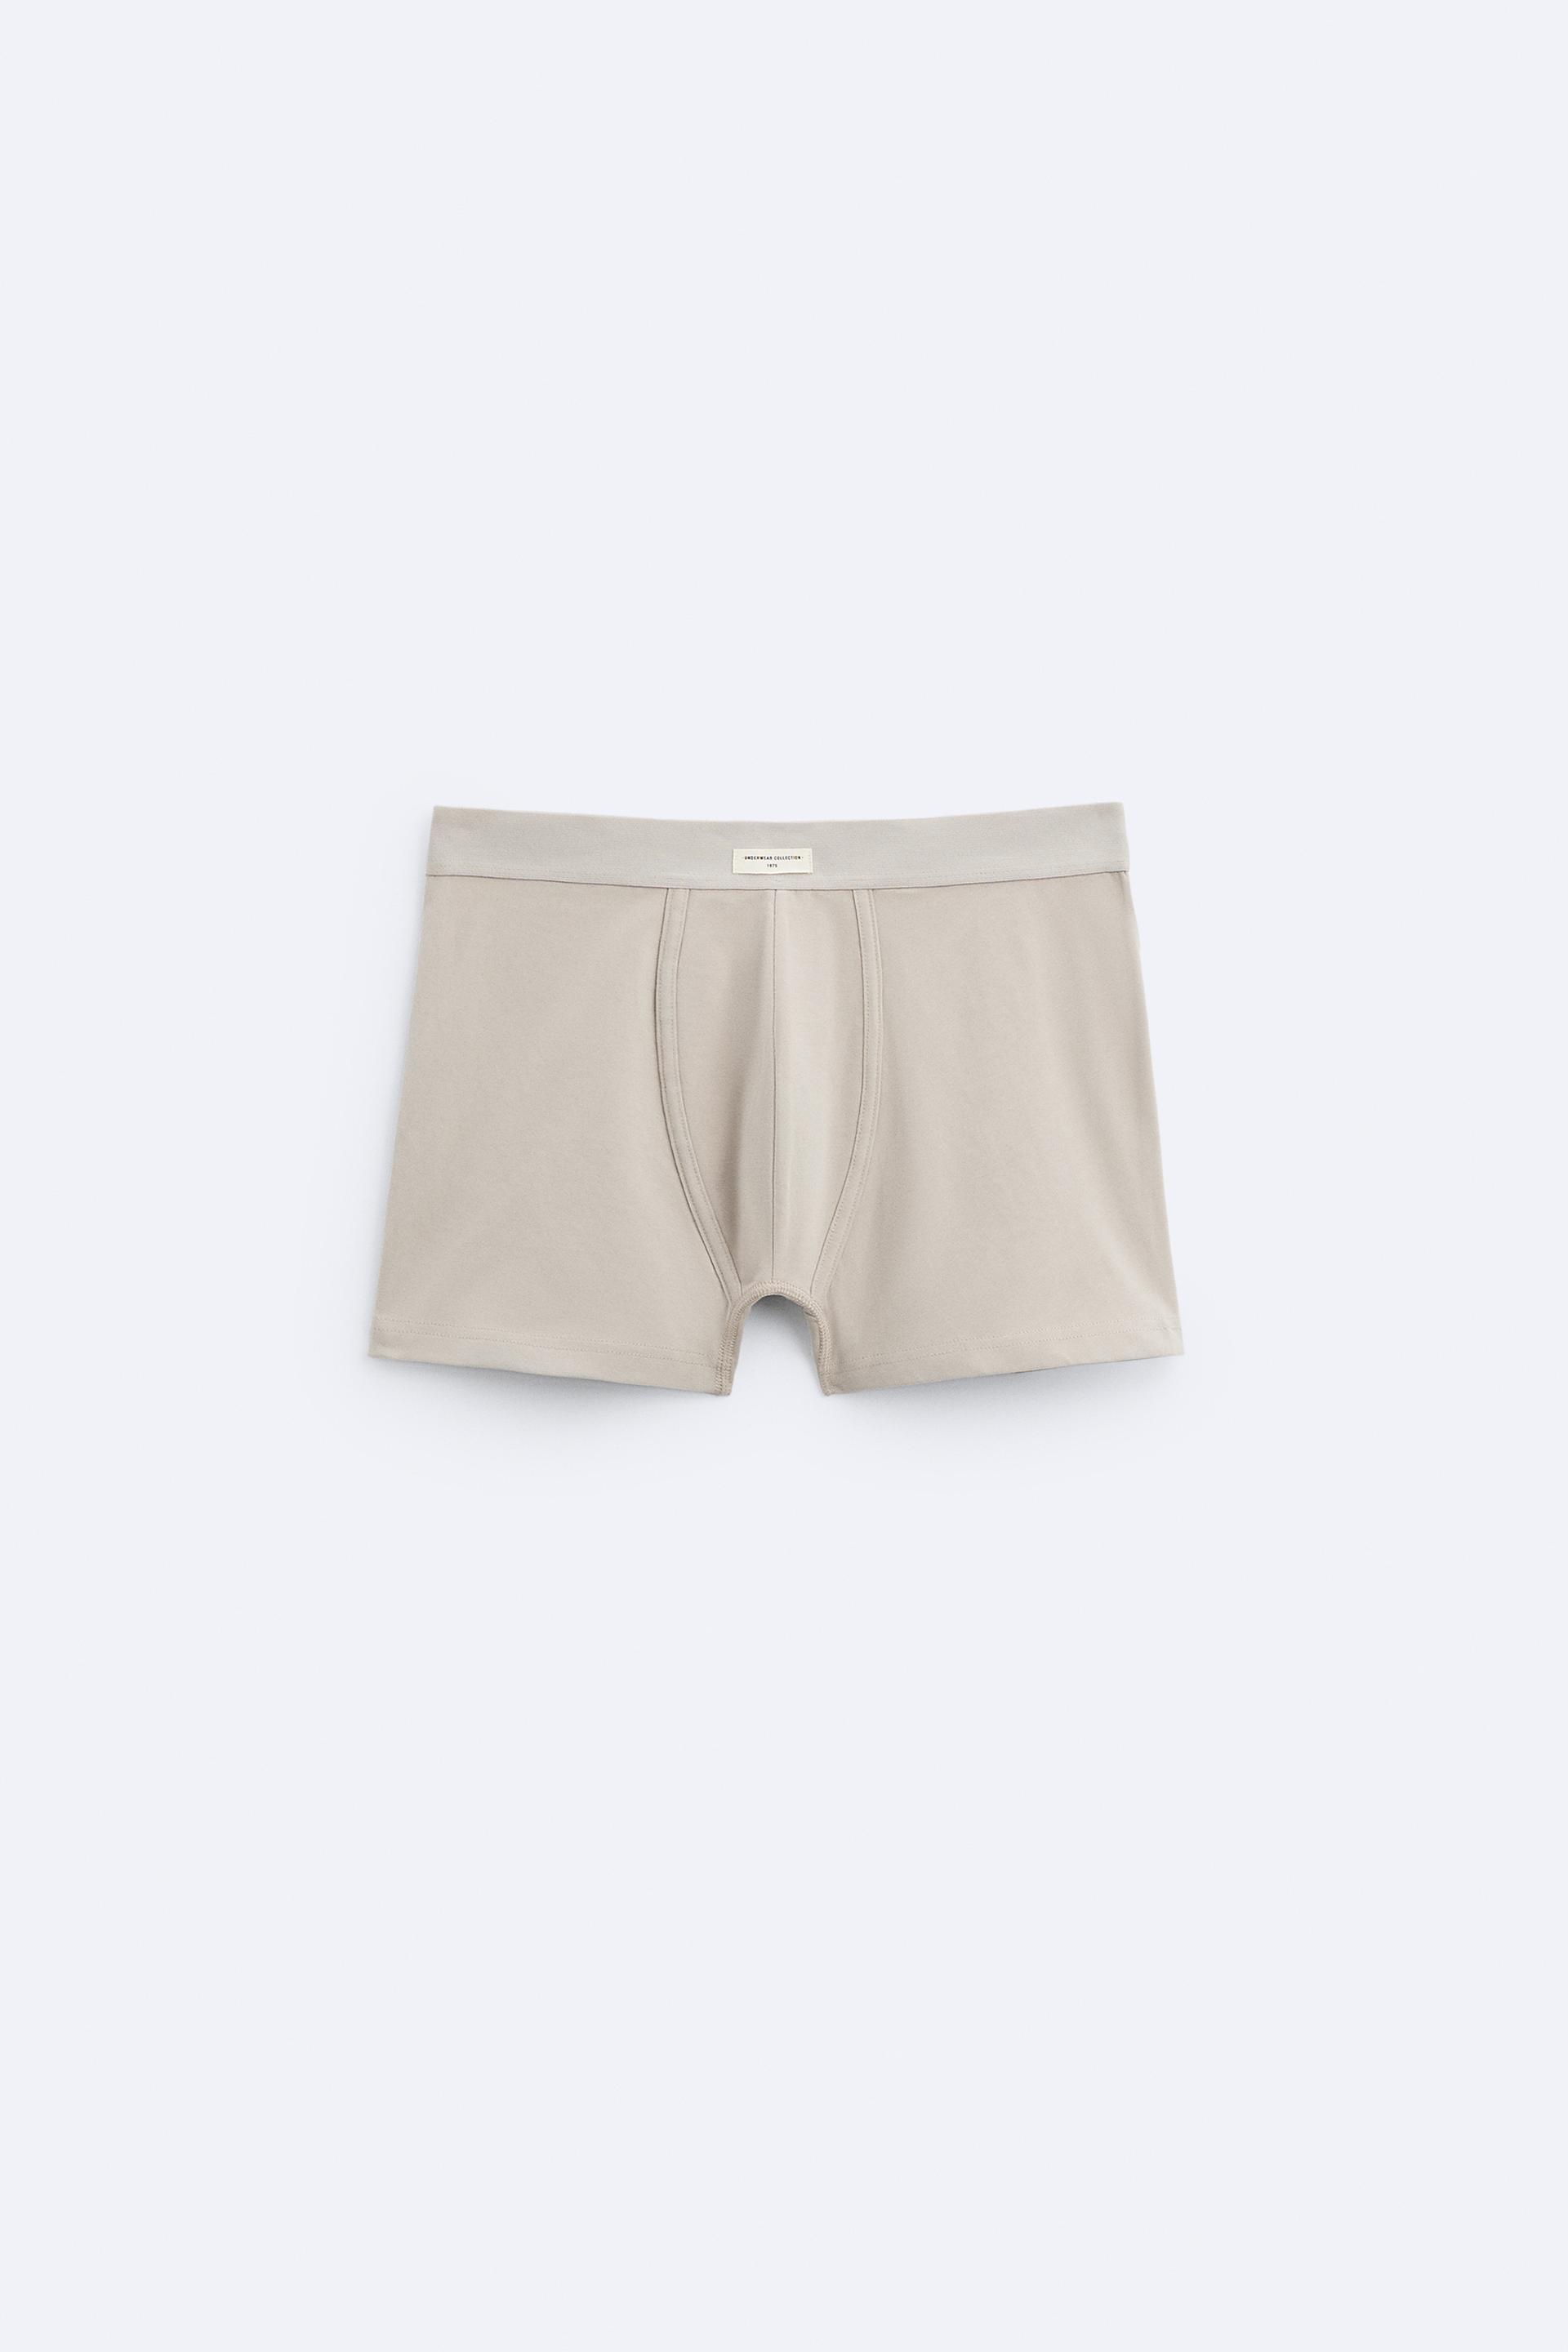 Zara boxers review. It's made from cotton, it's breathable and